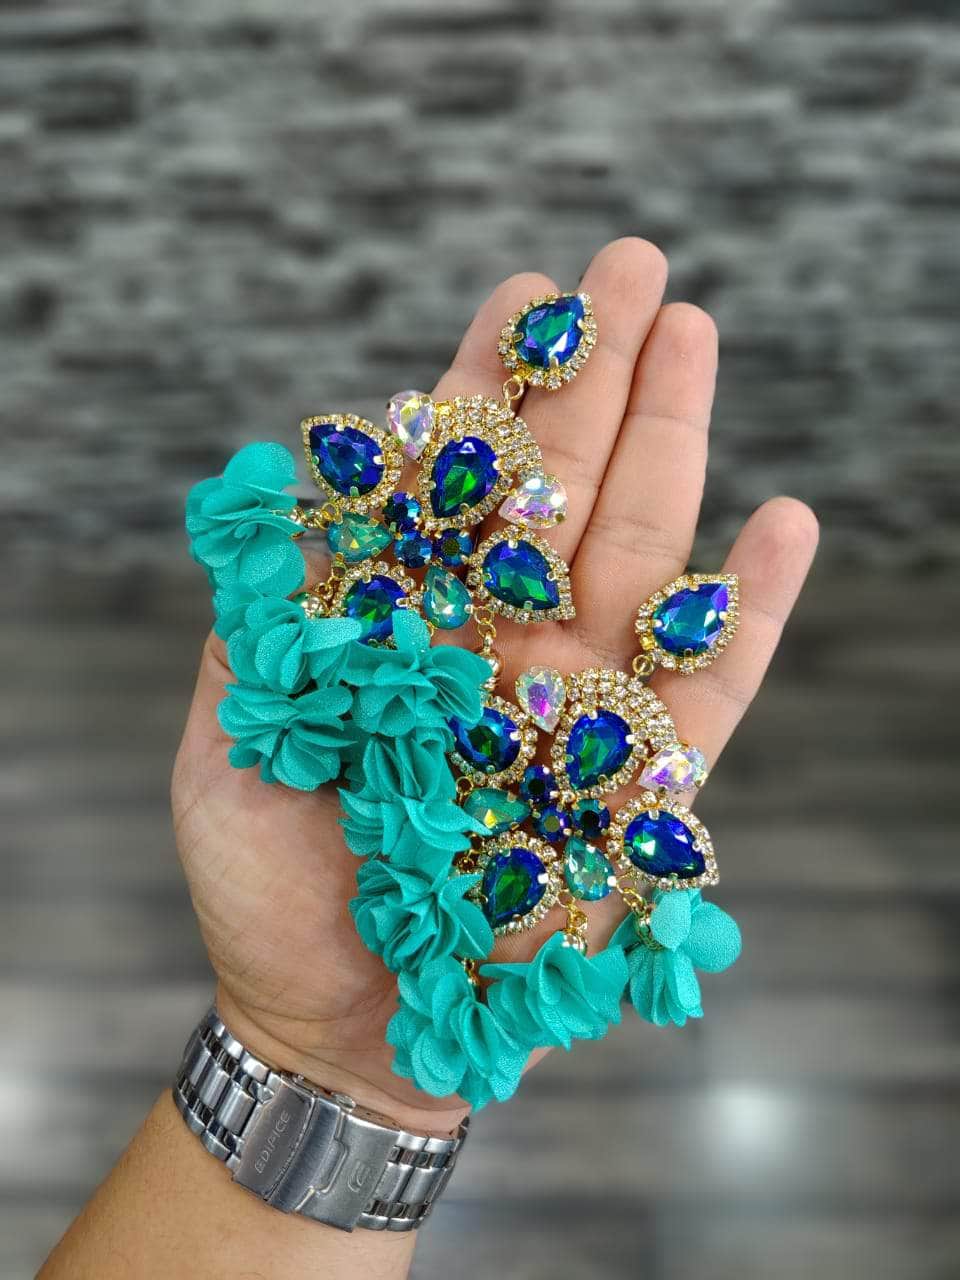 Restock our most trending and running flower earring worn buy Influential big boss contestant like Mahira sharma and Nikki tamboli available - Zevar